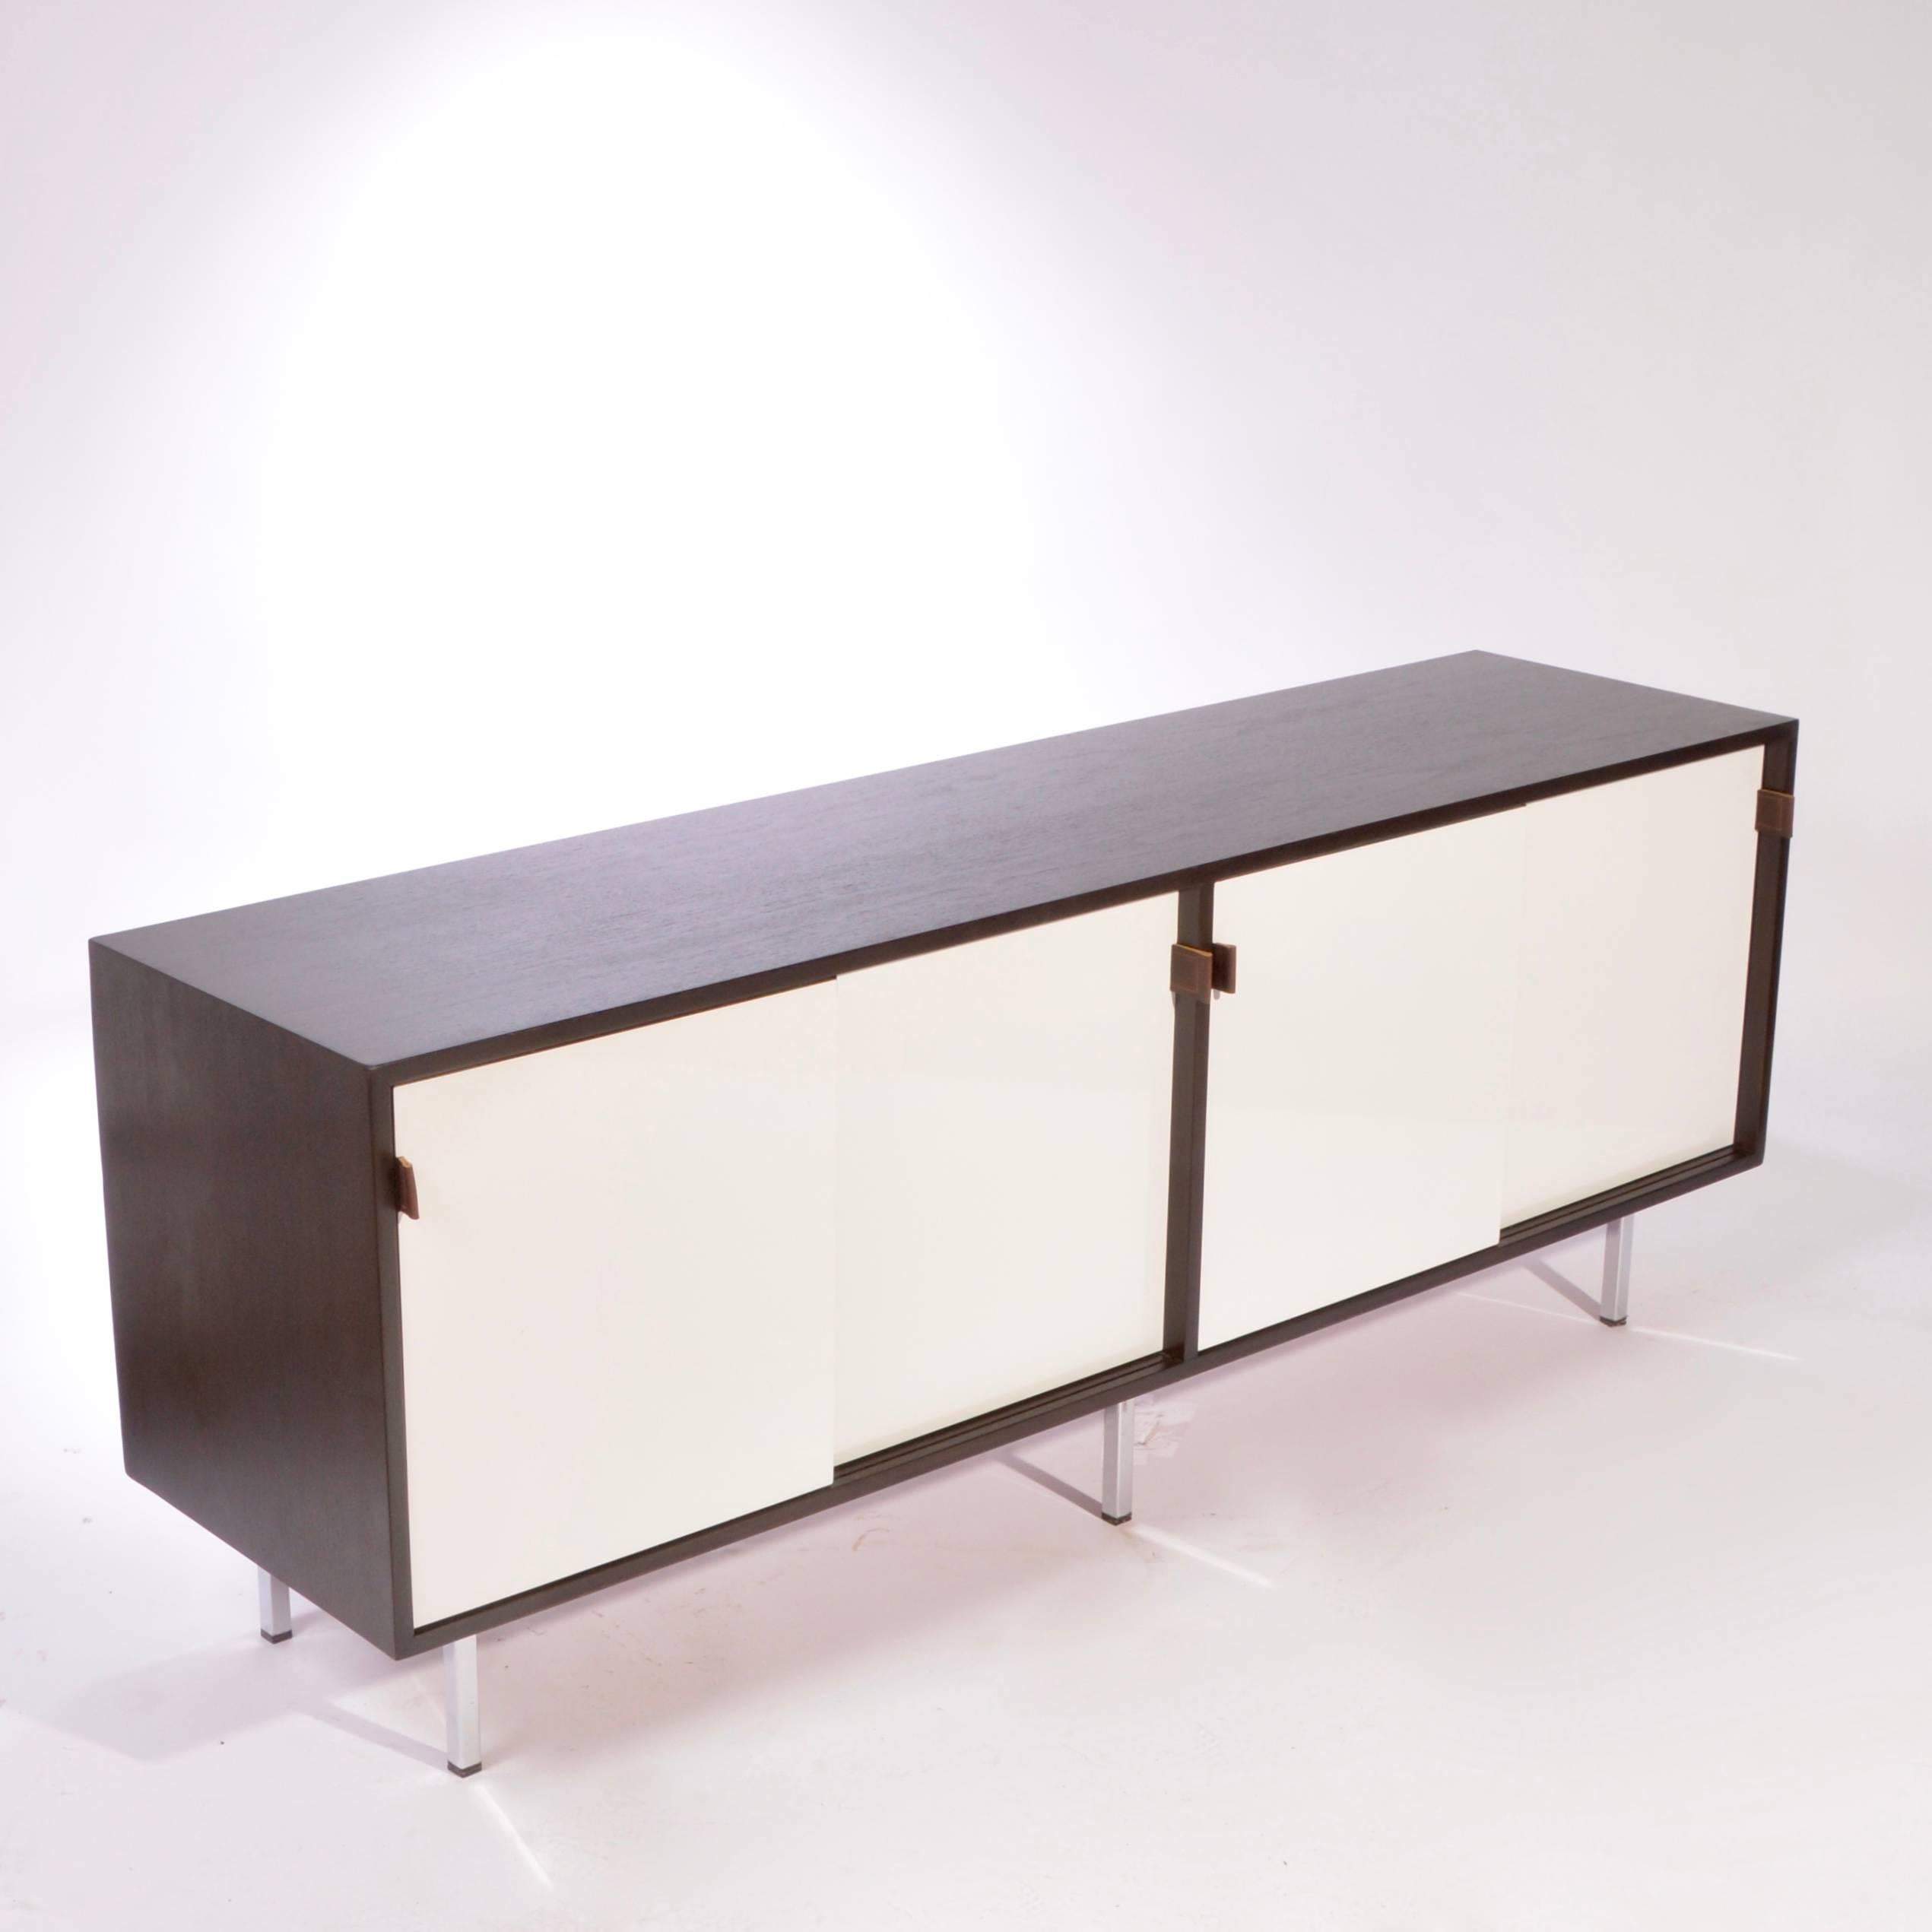 American Early and Rare Florence Knoll Credenza in Ebonized Teak and White Formica